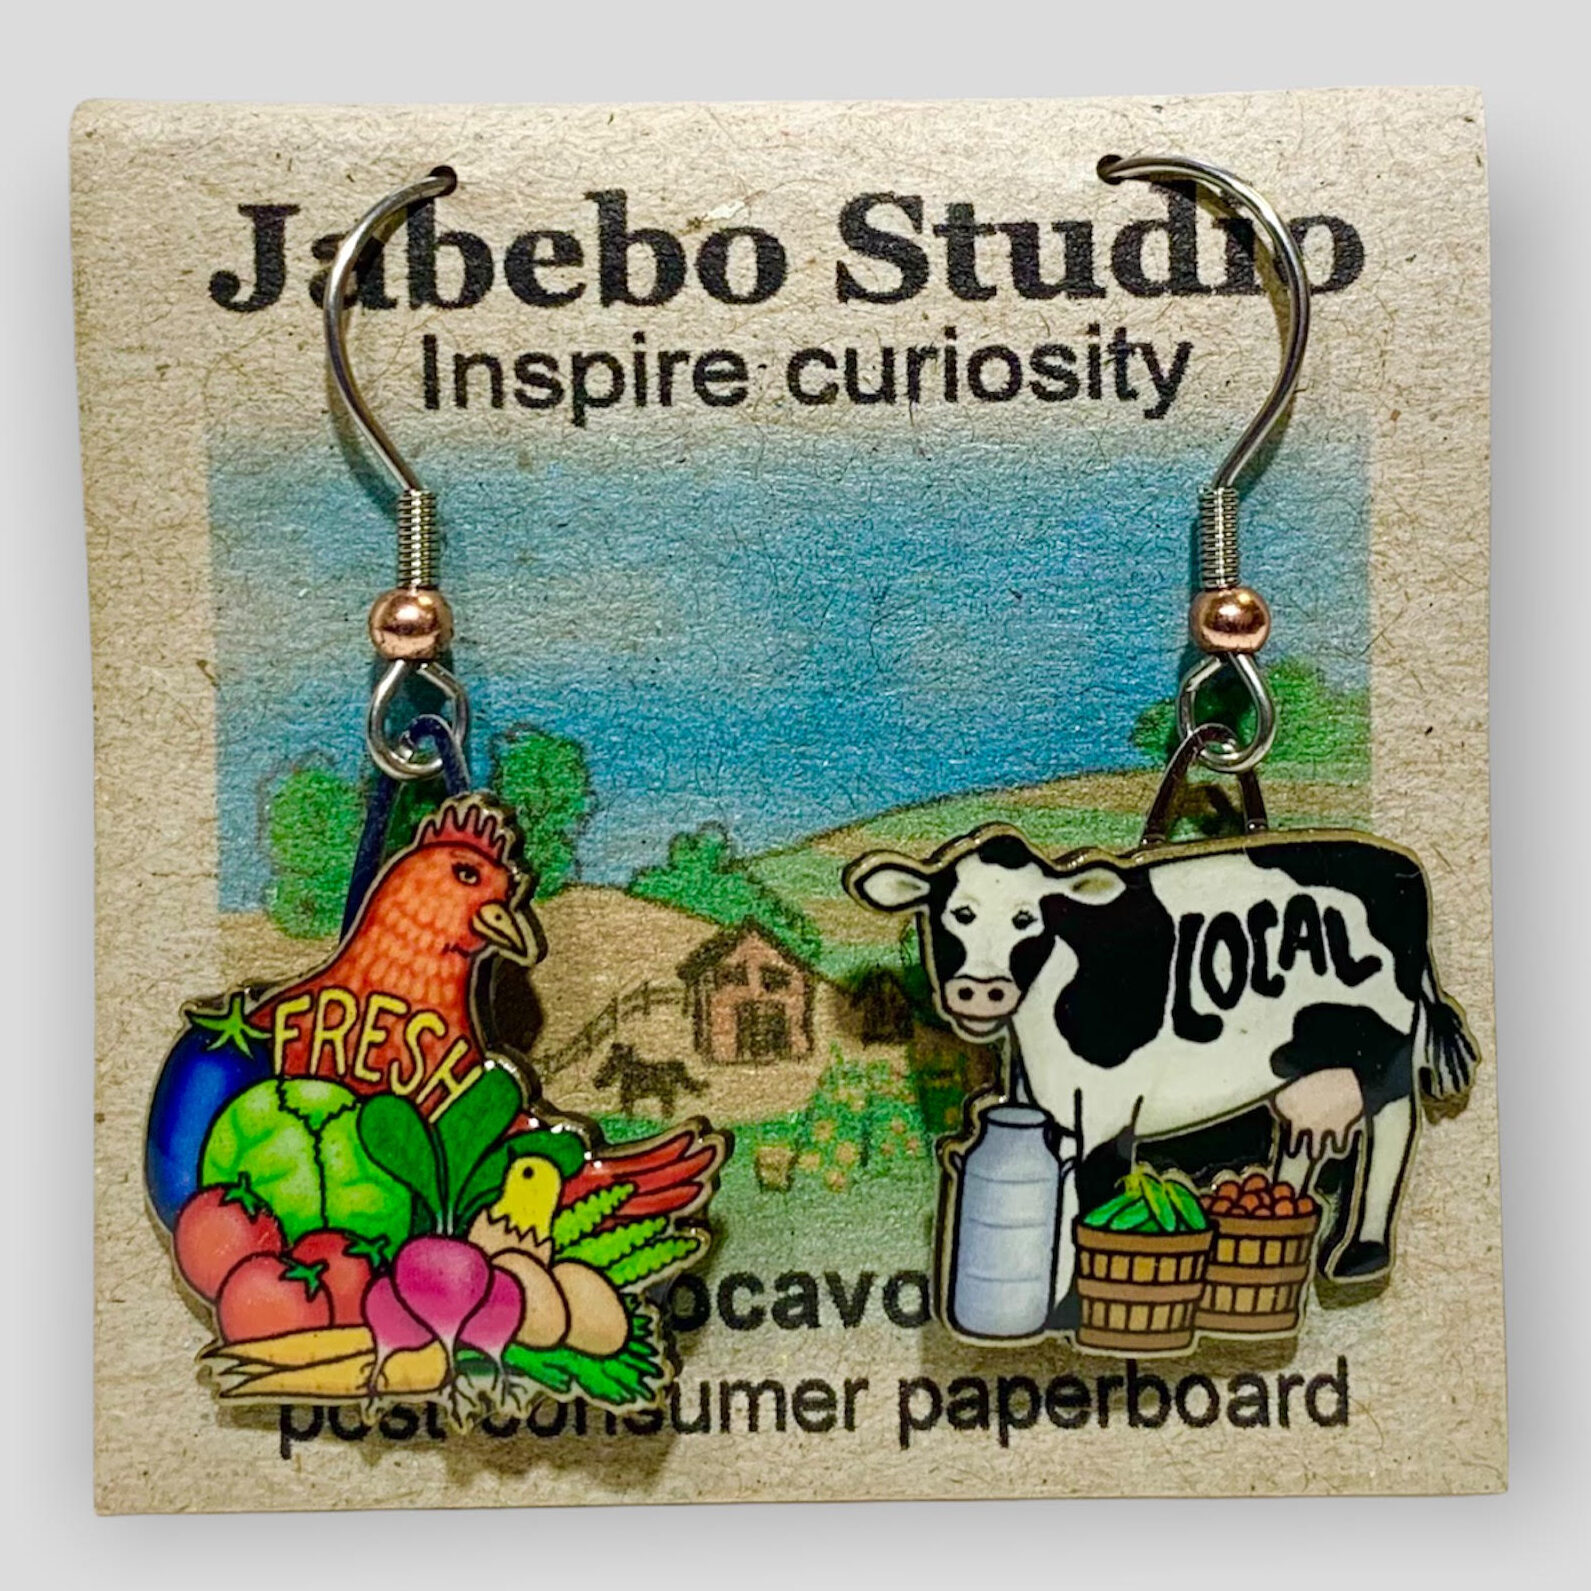 Picture shown is of 1 inch tall pair of earrings of Locavore (Chicken, Produce, & Cows).